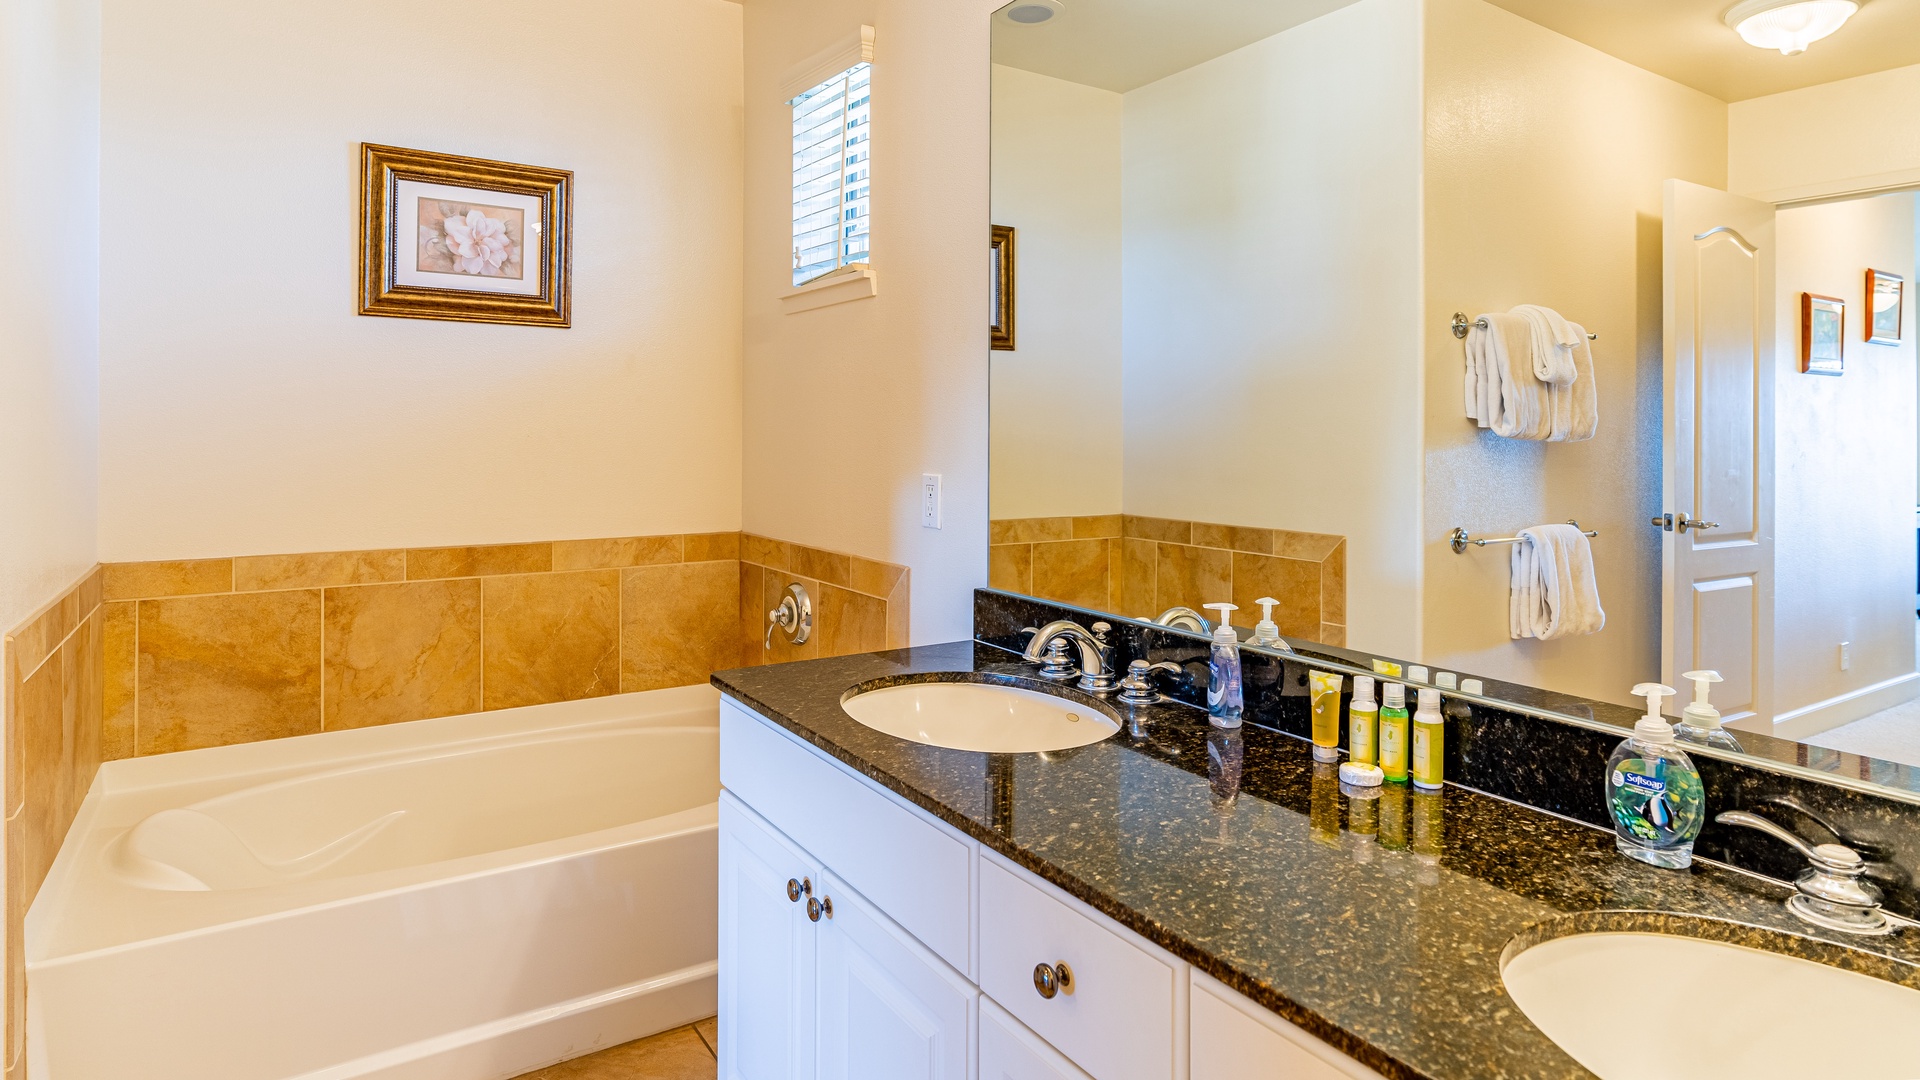 Kapolei Vacation Rentals, Ko Olina Kai 1033C - The primary guest bathroom with a soaking tub and large vanity.